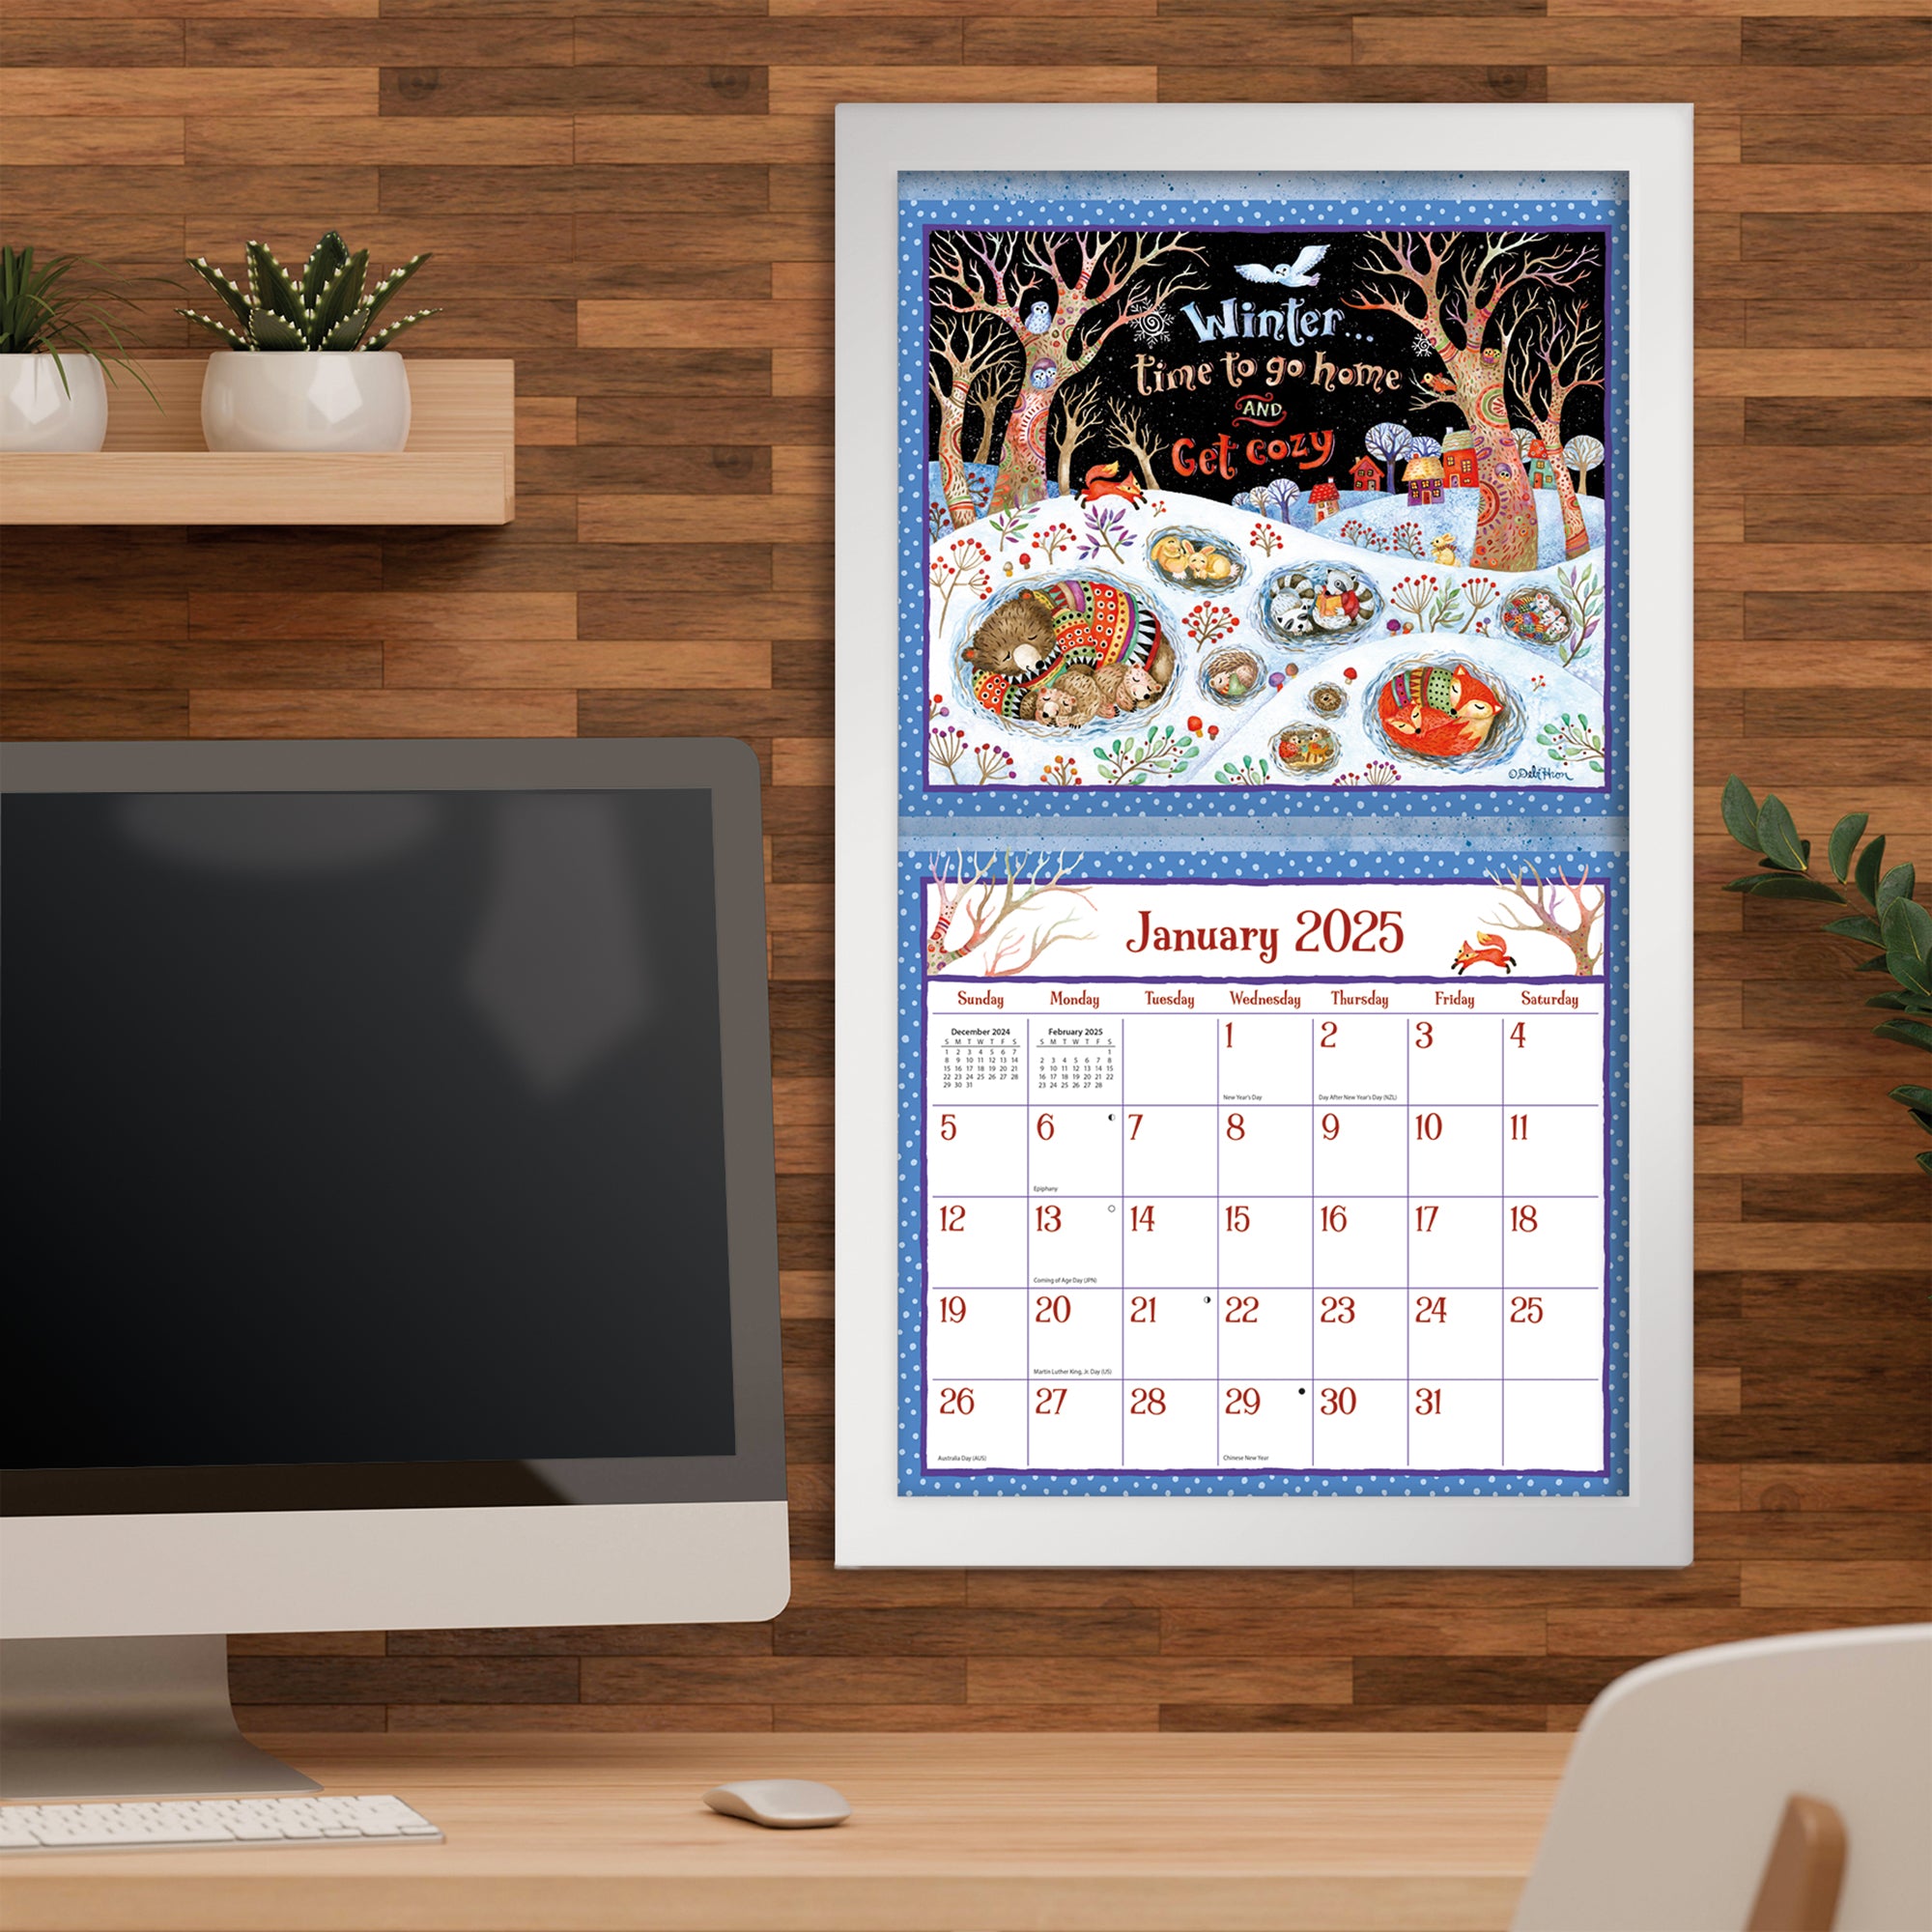 2025 Simple Inspirations By Debi Hron - LANG Deluxe Wall Calendar